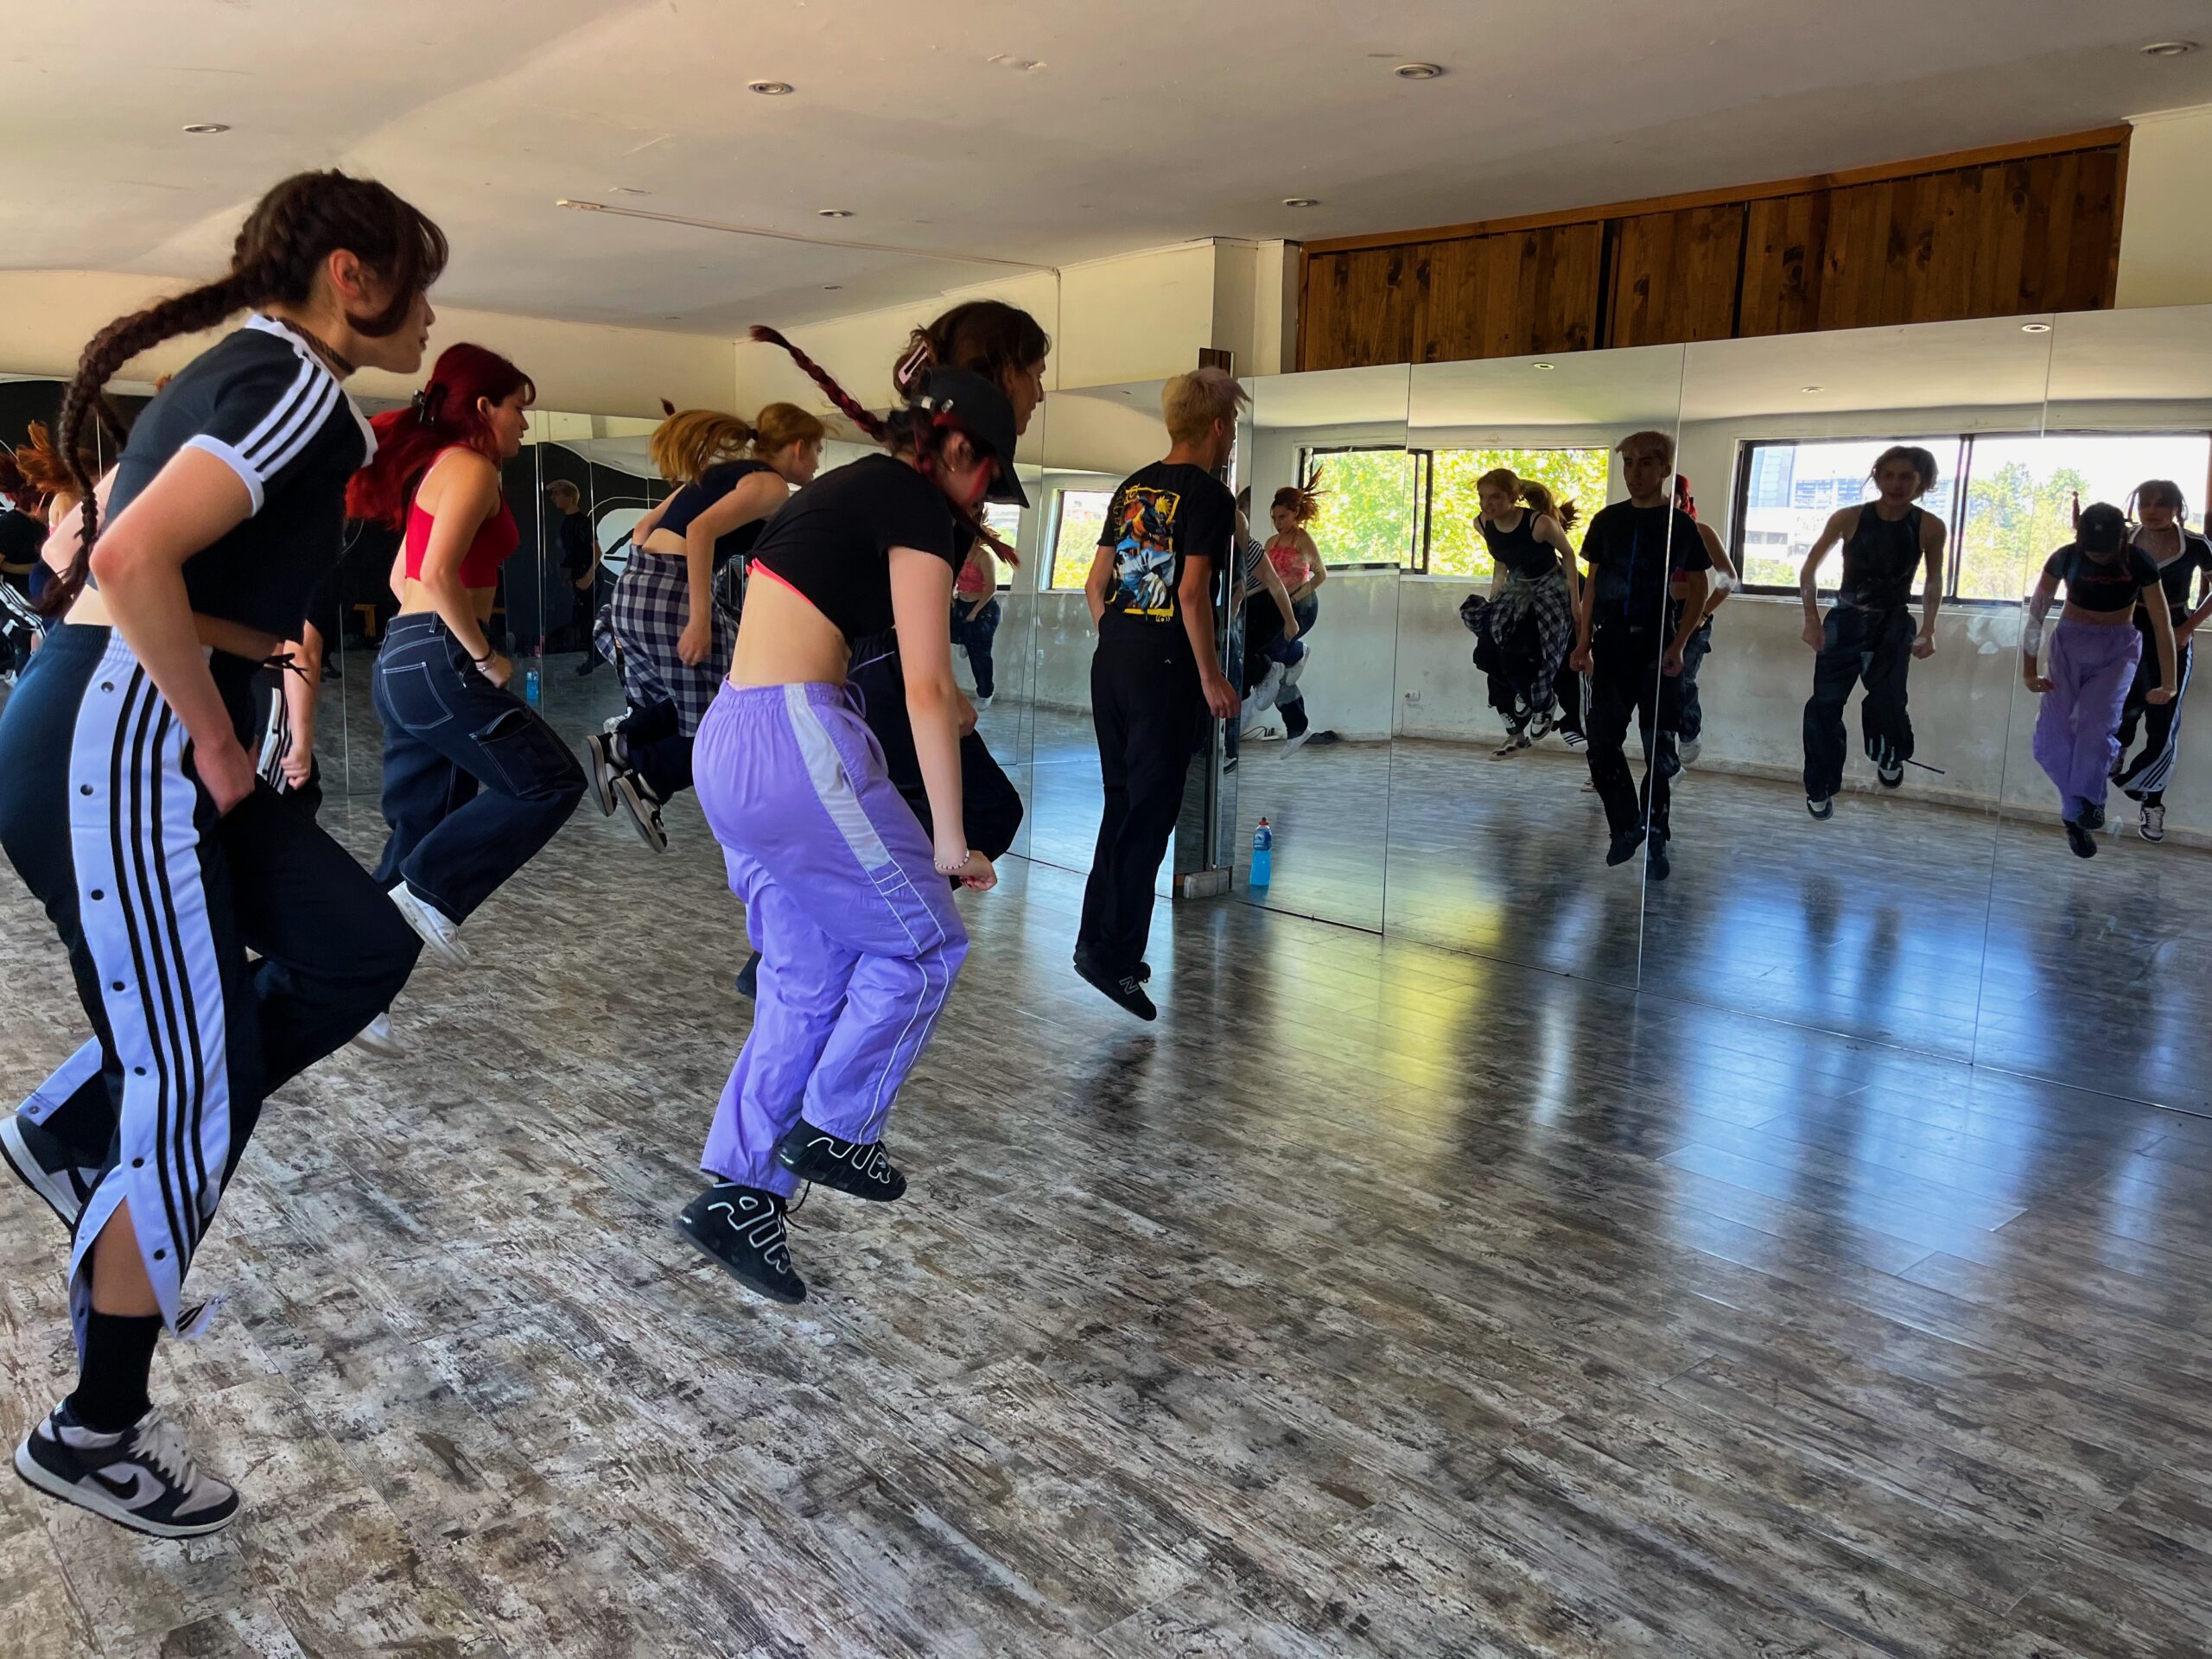 Members of the K-pop dance cover group Catch the L1ght practice in Chile. Photo by Charis McGowan.